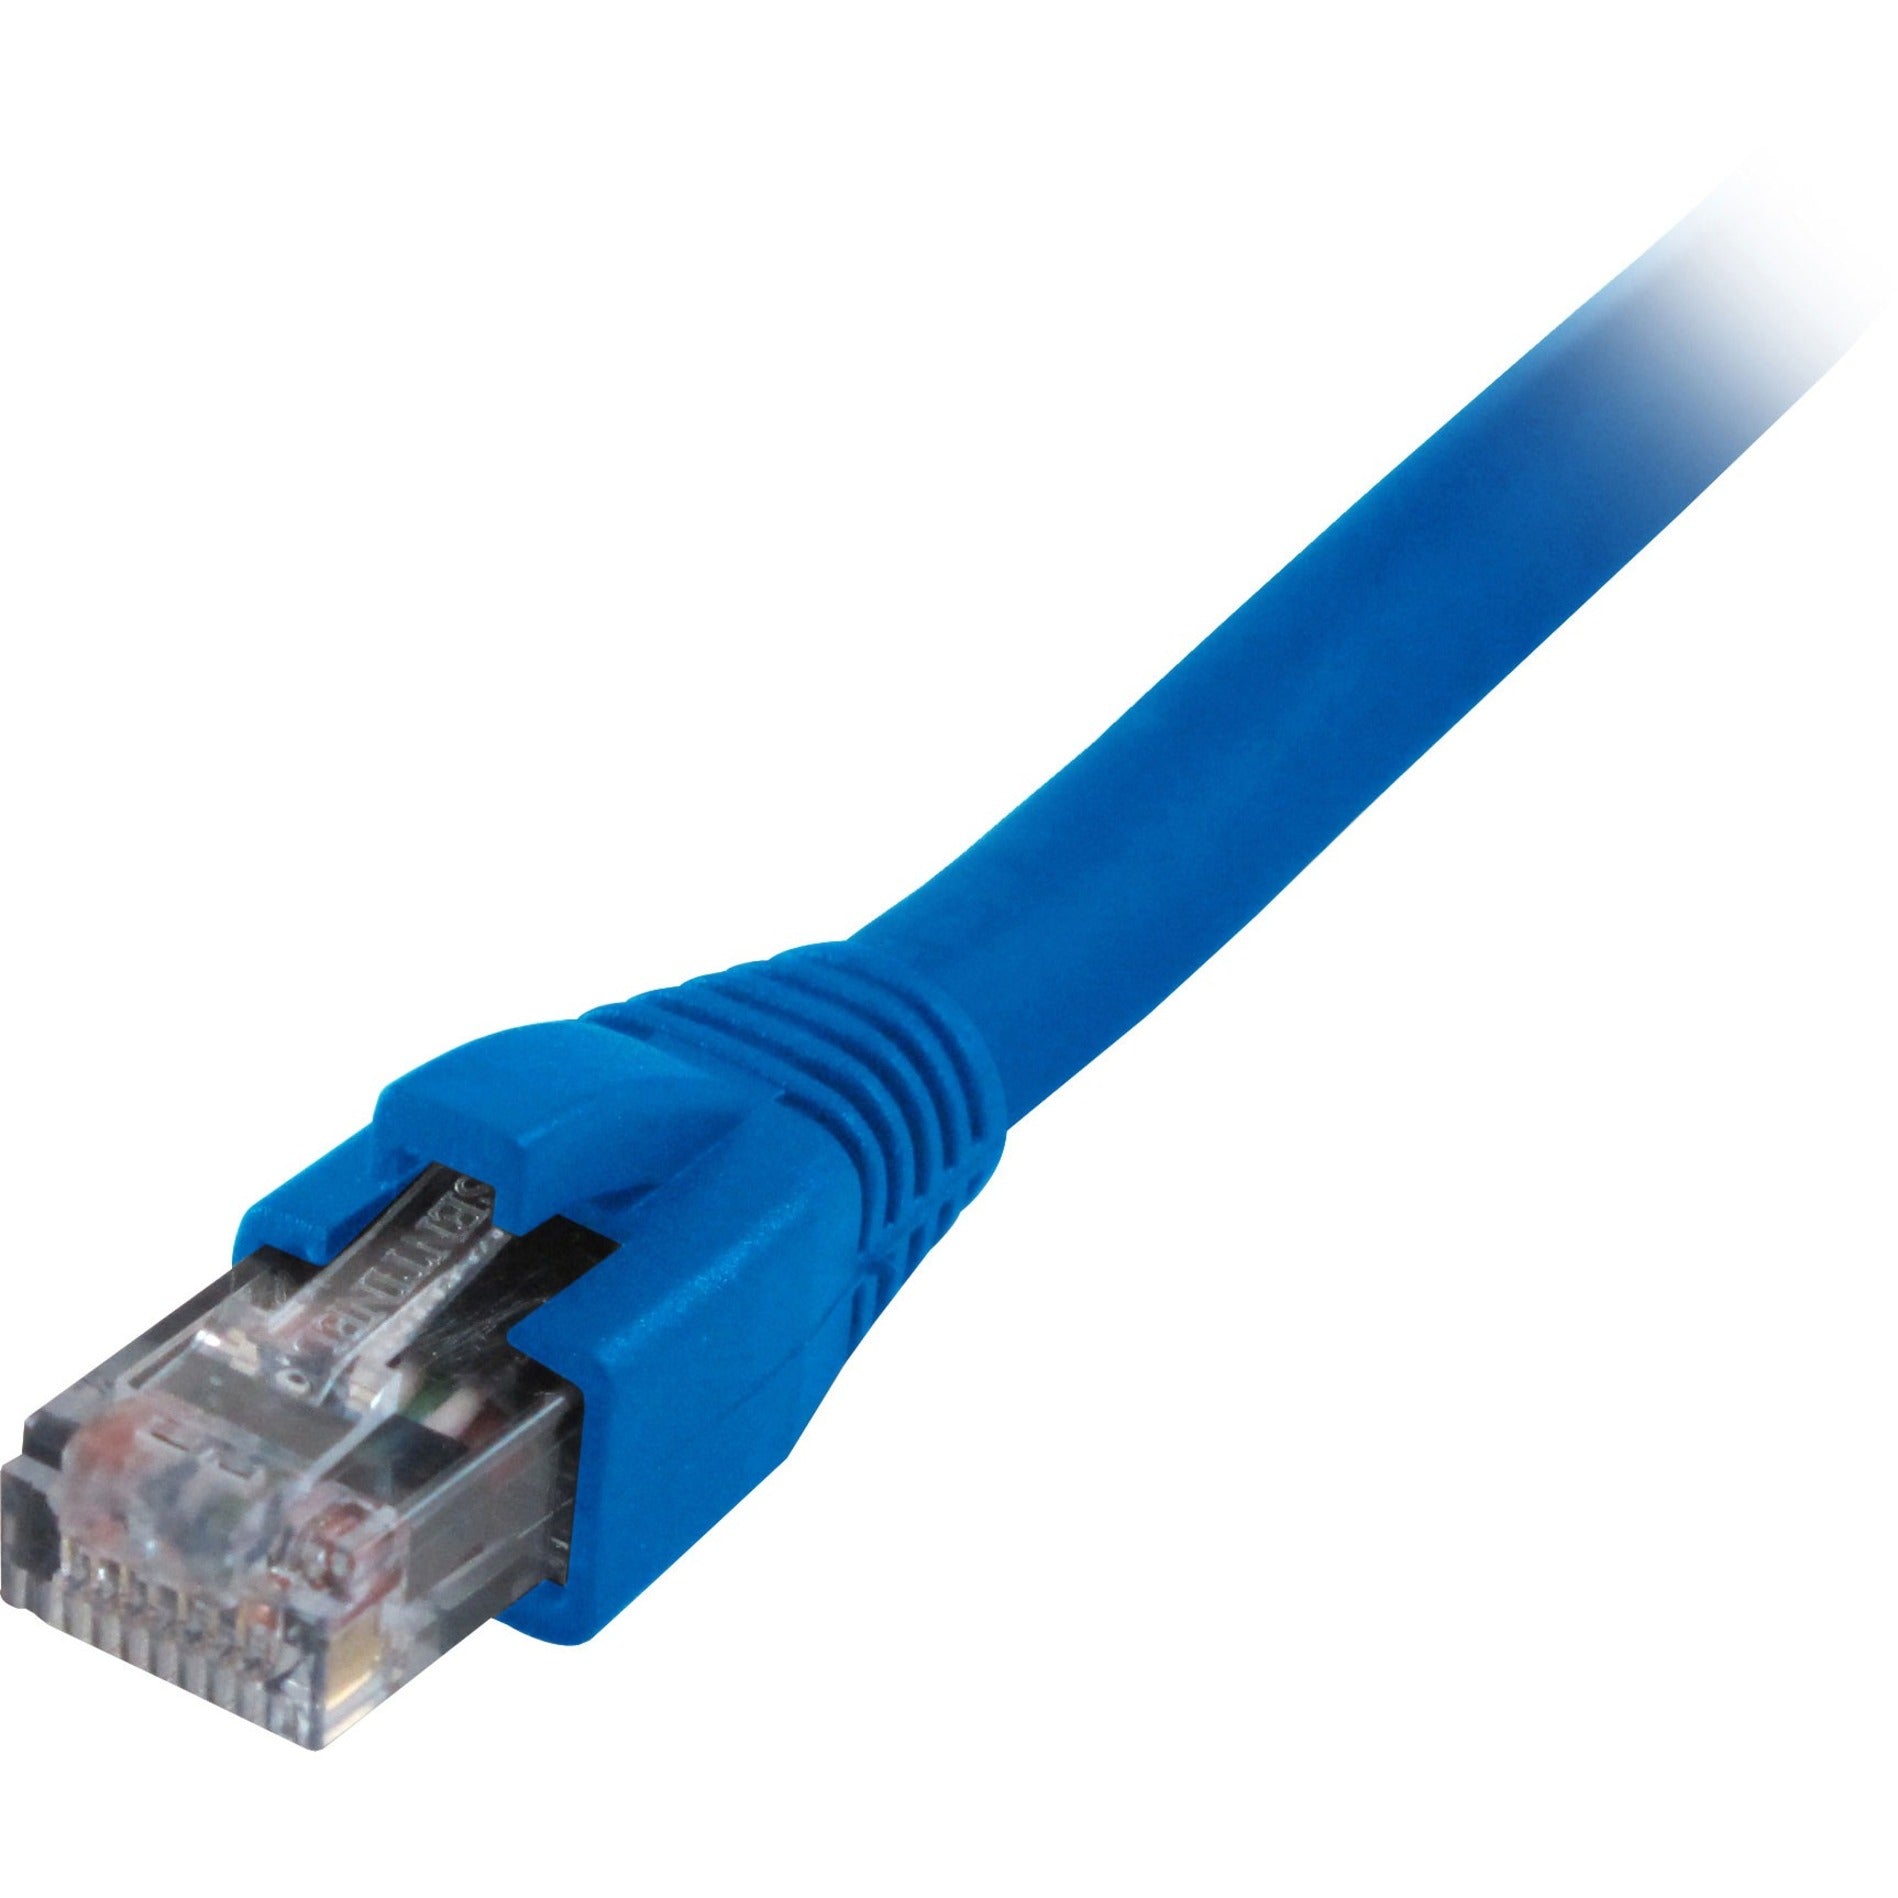 Comprehensive CAT6A-7BLU CAT6A Shielded Patch Cable Blue 7ft., 10Gbps Data Transfer Rate, Snagless Boot